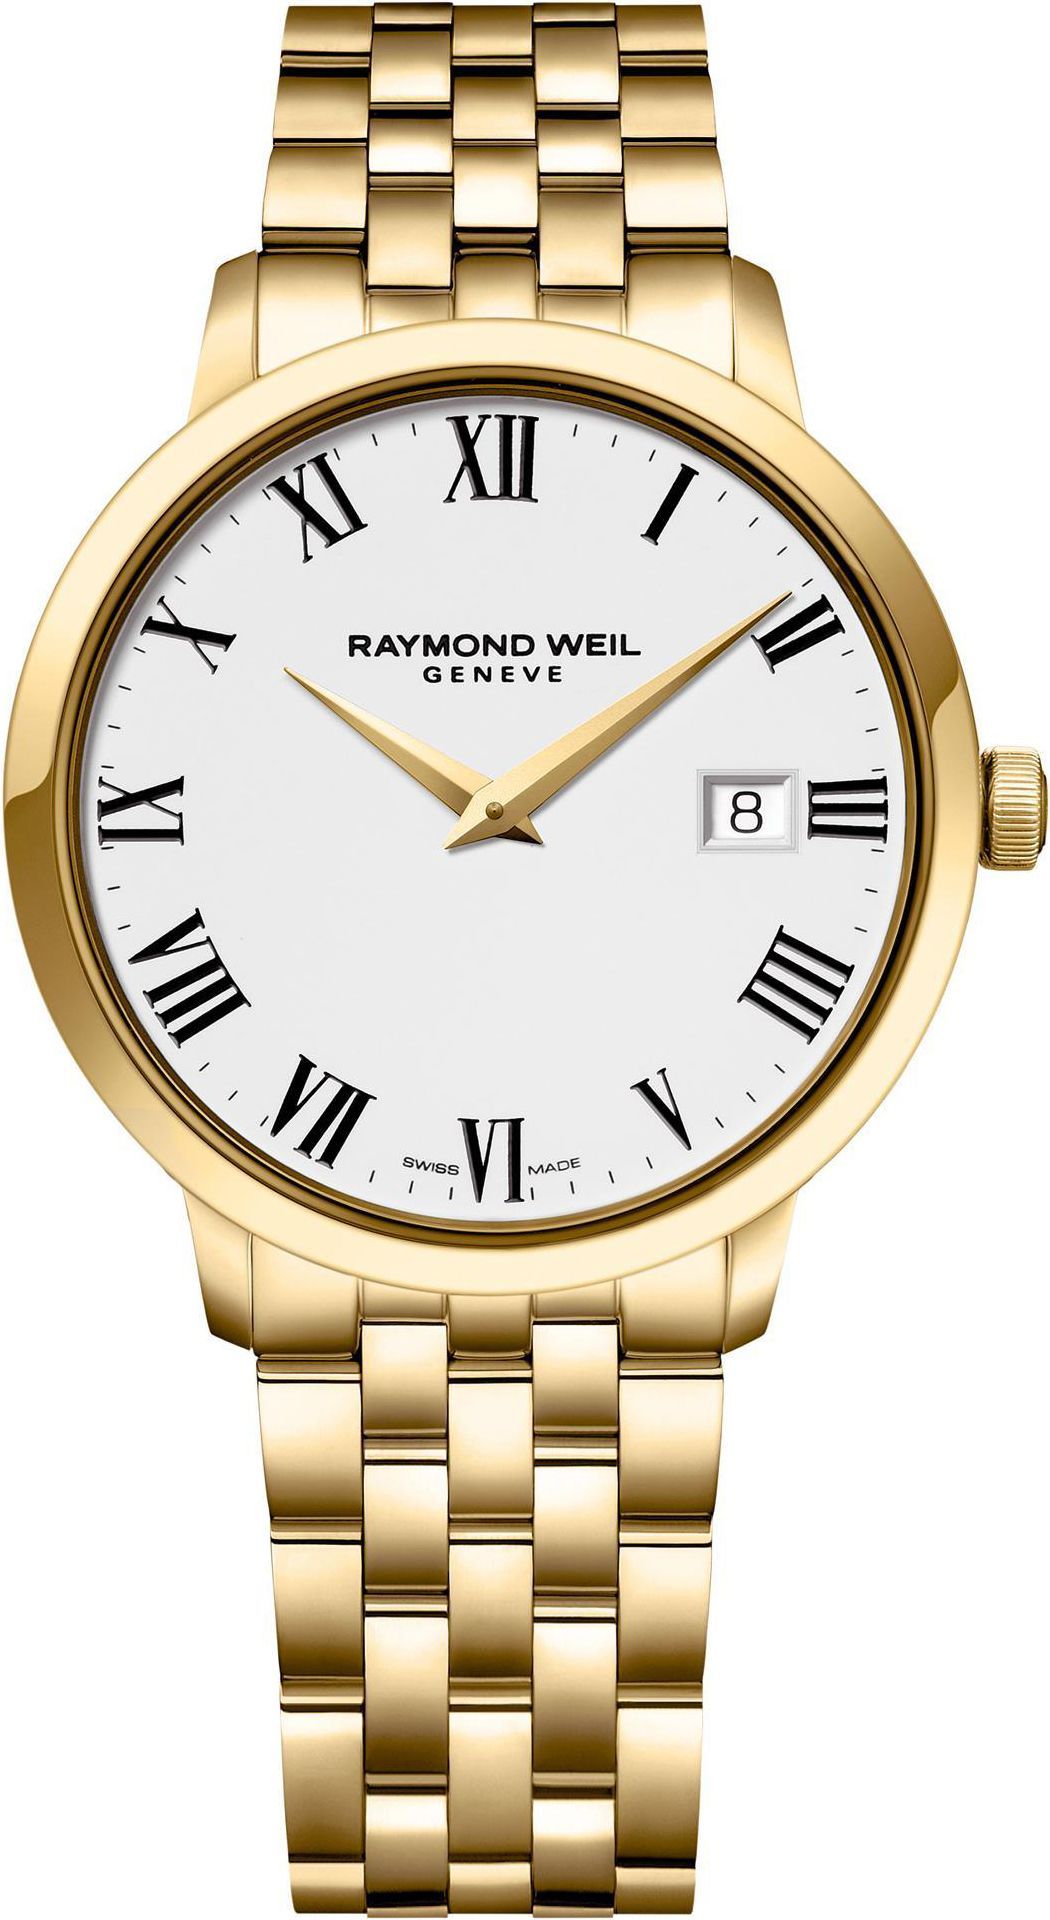 Raymond Weil  39 mm Watch in White Dial For Men - 1